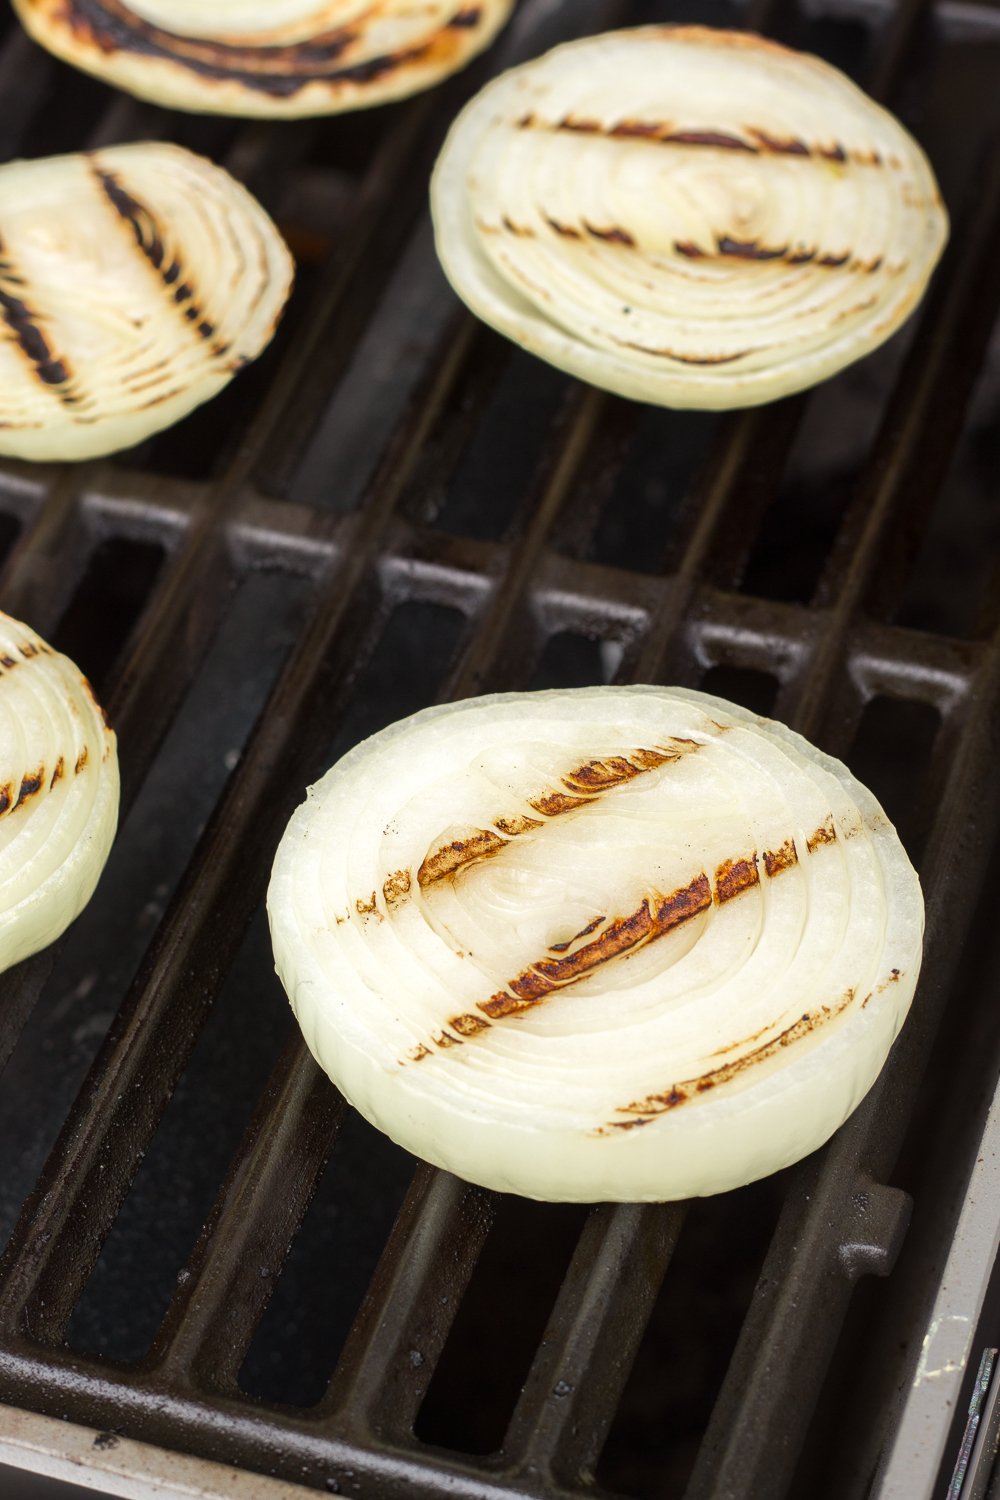 Slices of grilled onions on the grill grates.